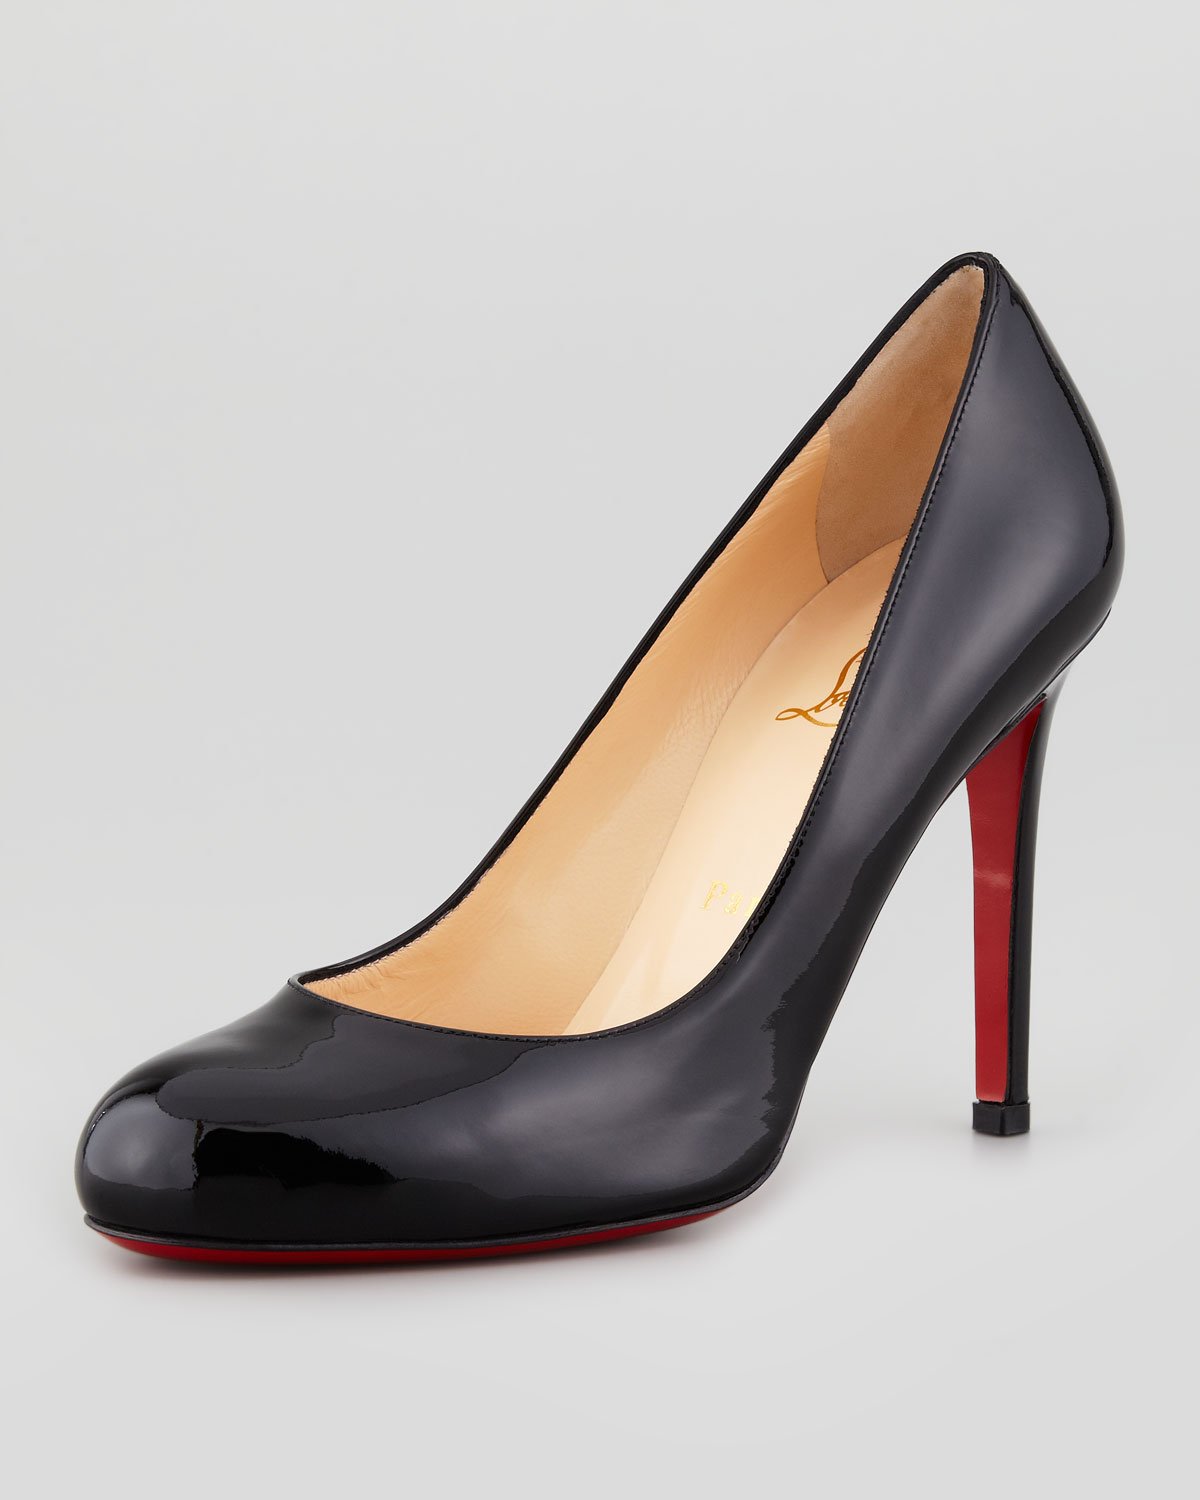 Christian Louboutin Simple Patent Red Sole Pump Black in Black | Lyst